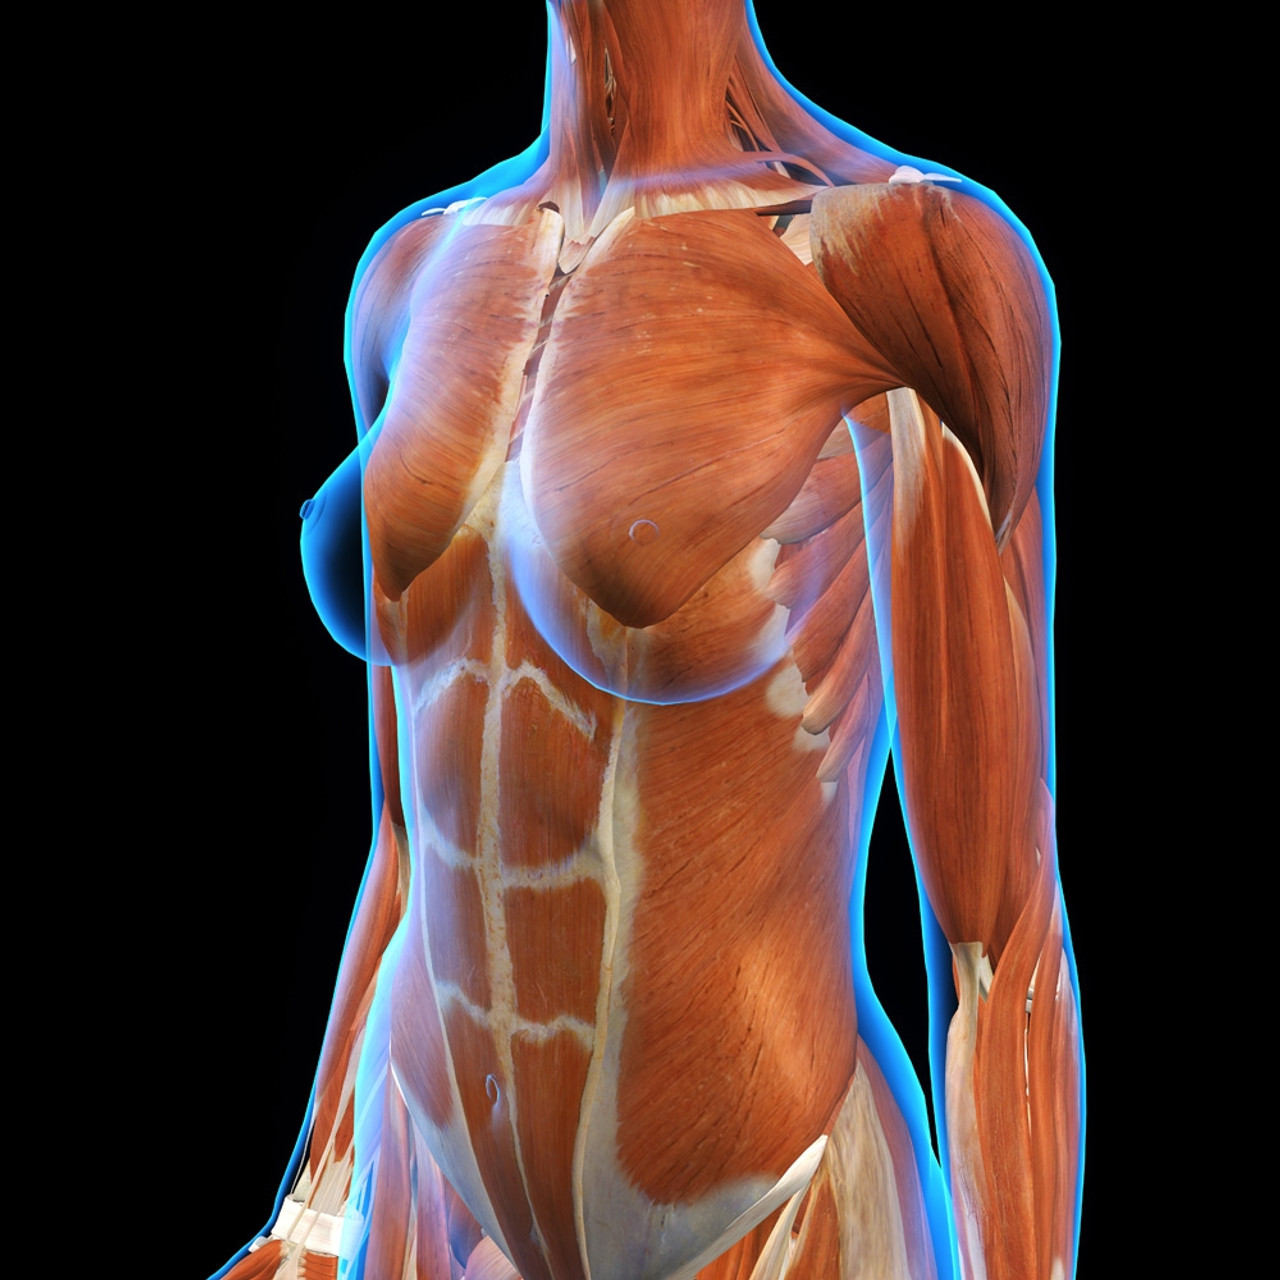 Three quarter view of female chest muscles, x-ray style. Poster